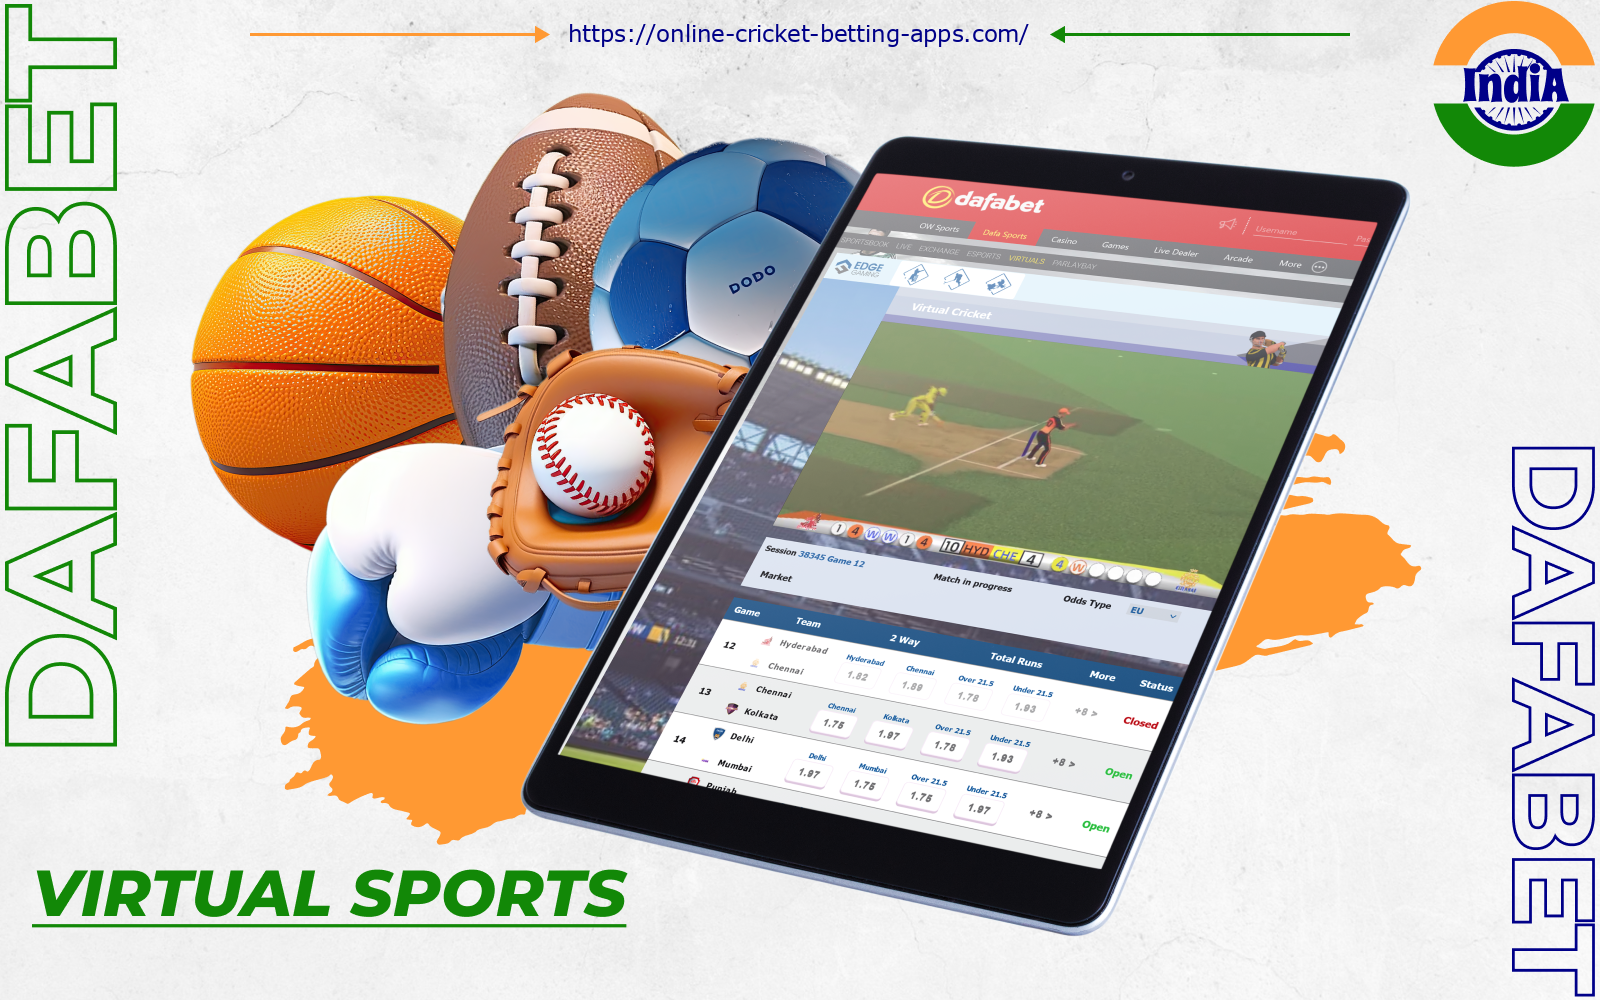 Dafabet users from India can bet on virtual sports